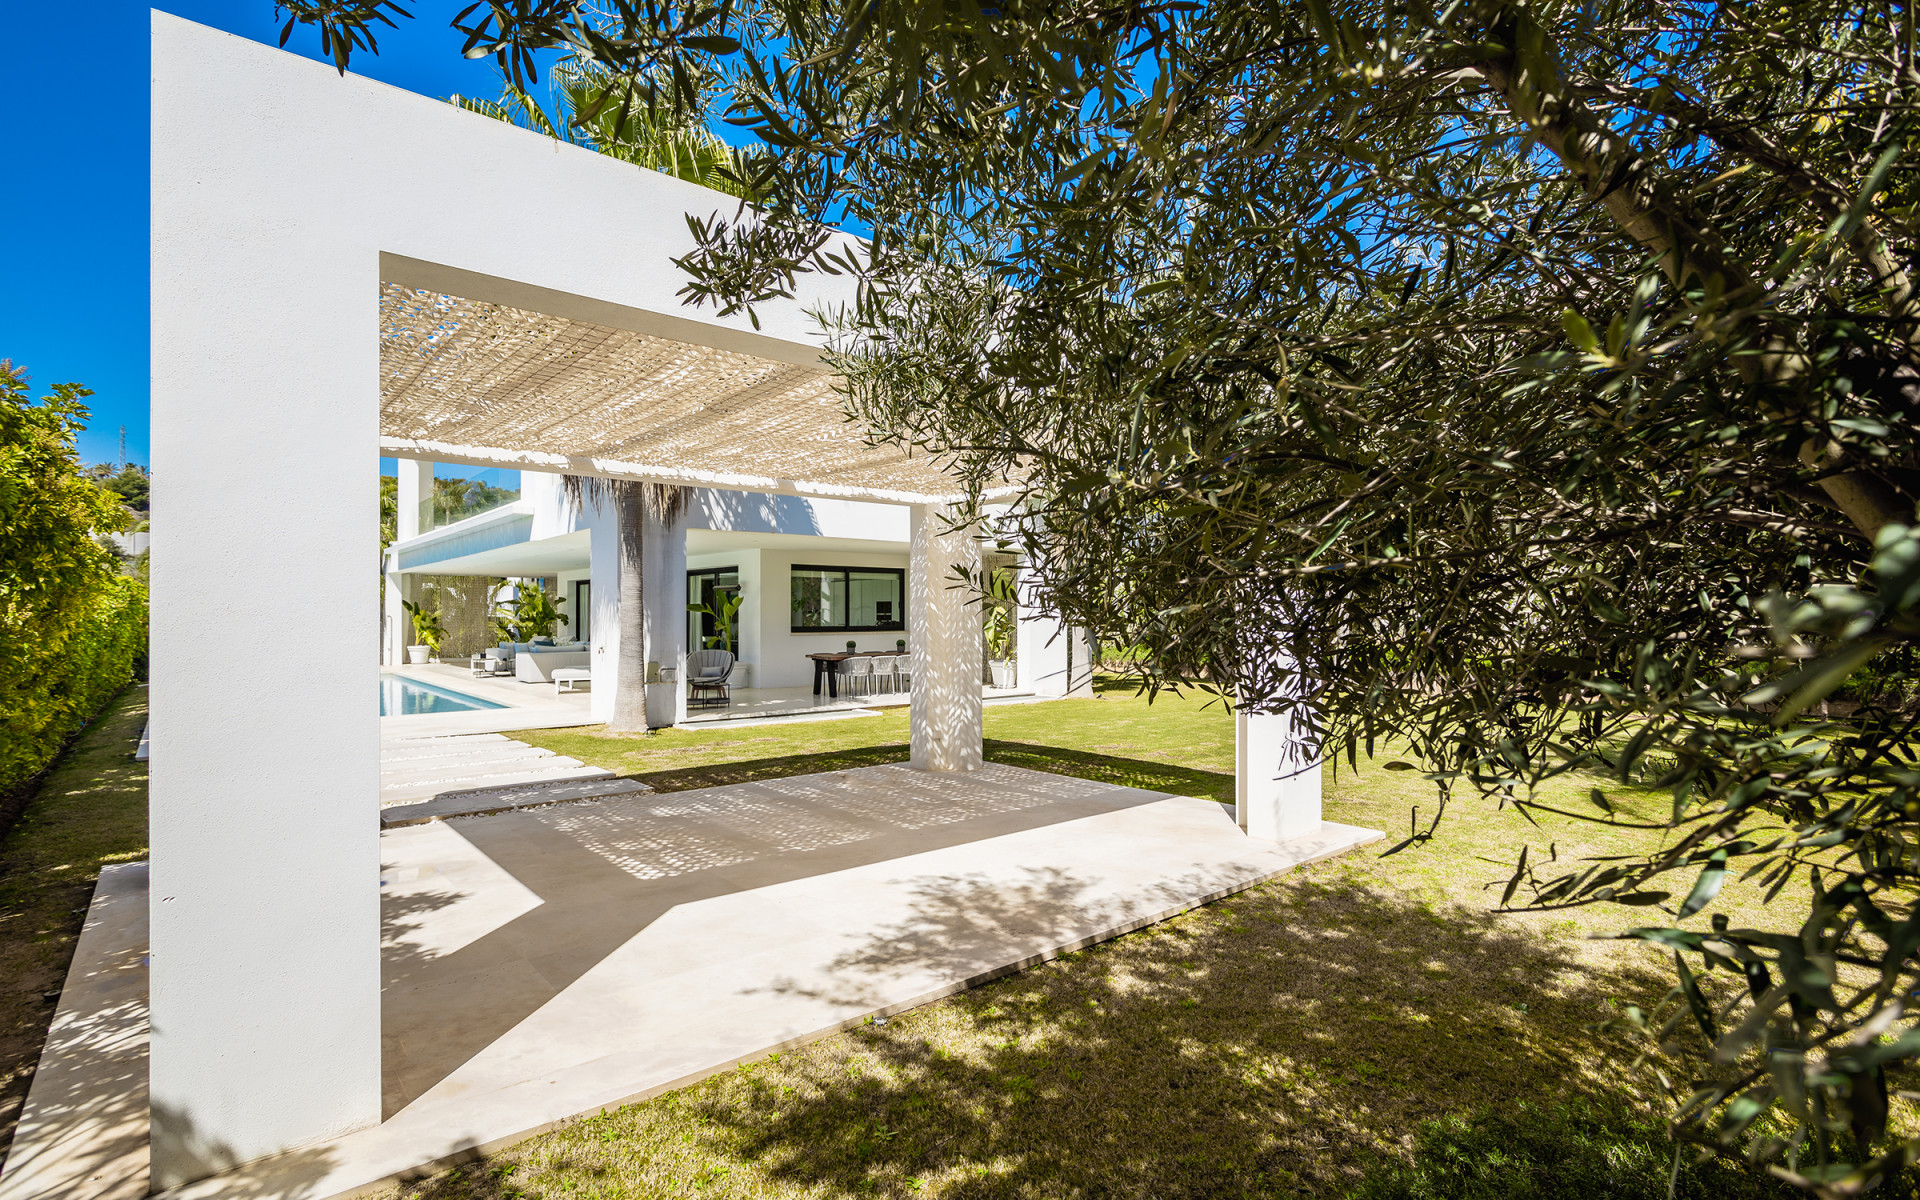 Contemporary luxury villa in a prestigious gated community within the Golf Valley